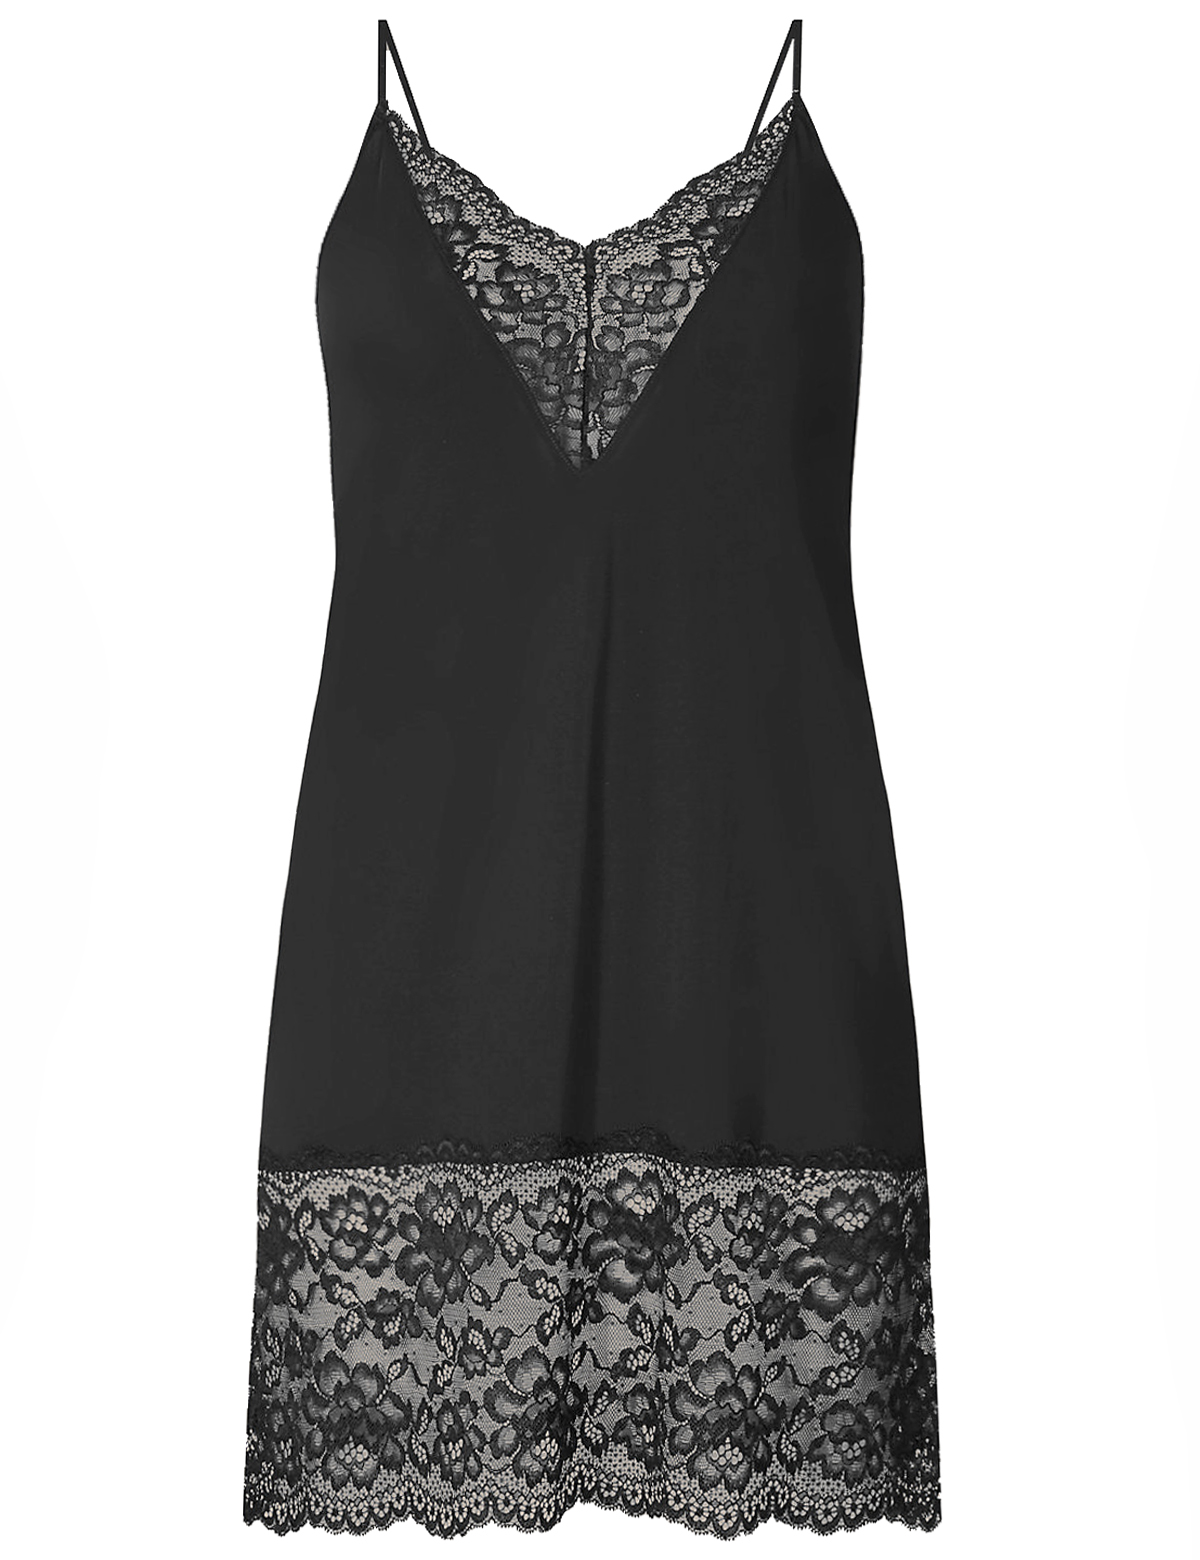 Marks and Spencer - - M&5 BLACK Lace Trim Full Slip - Size 12 to 22